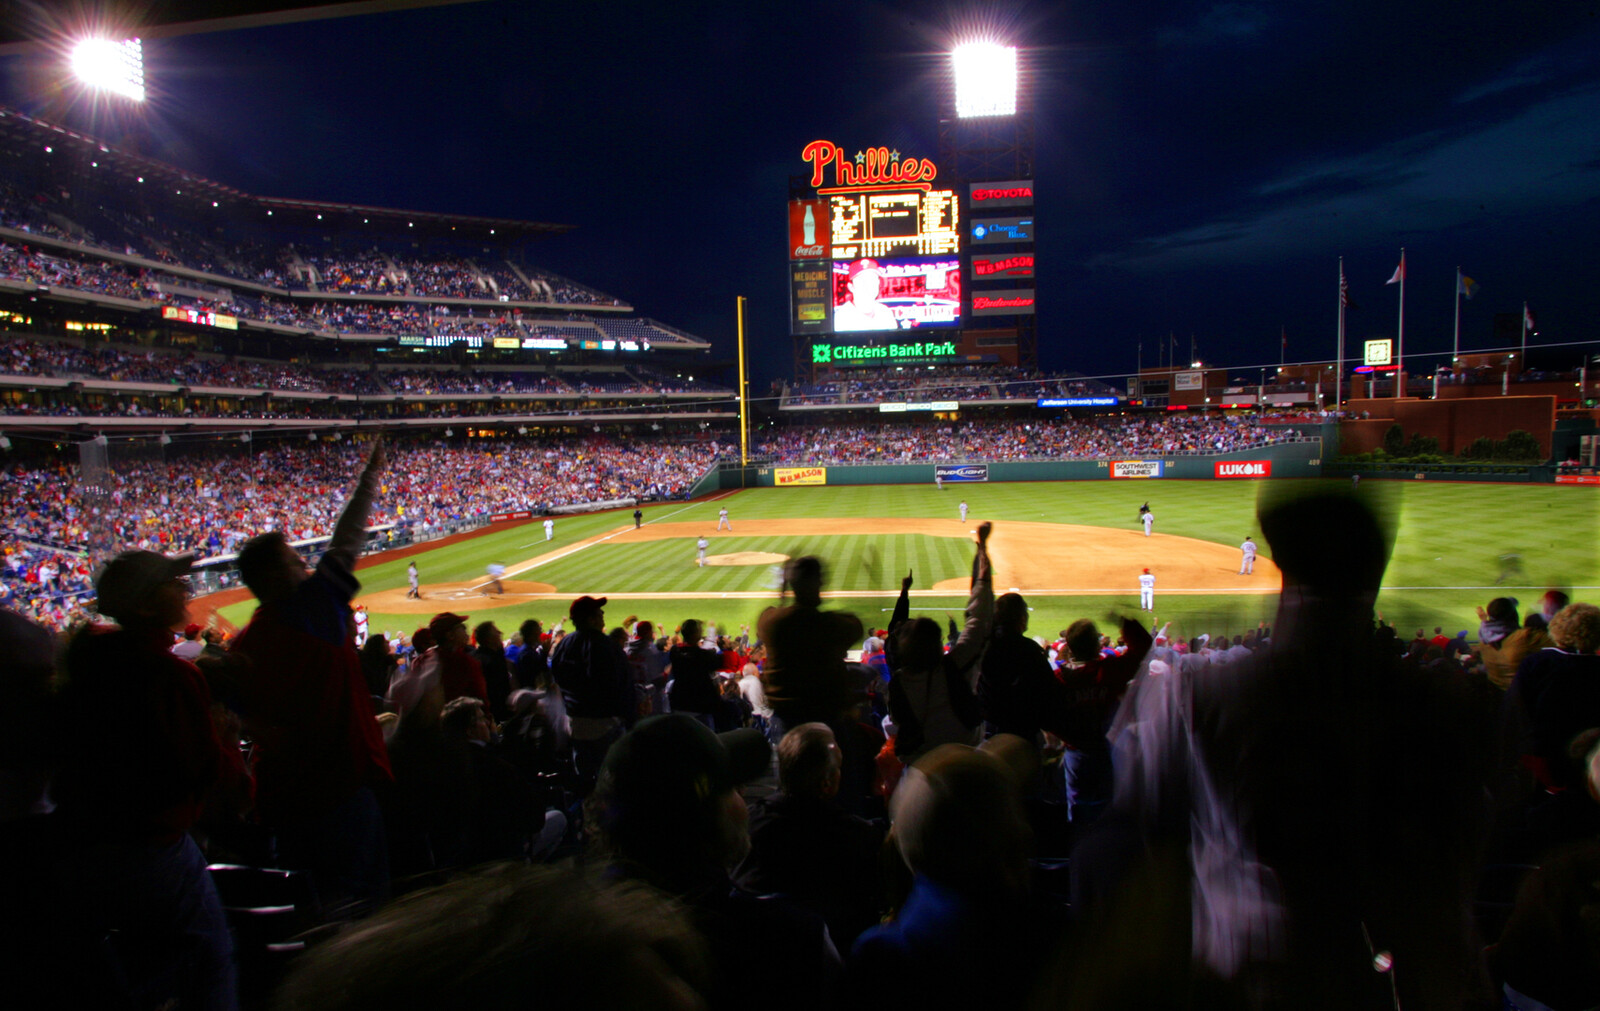 phillies game at citizens bank park